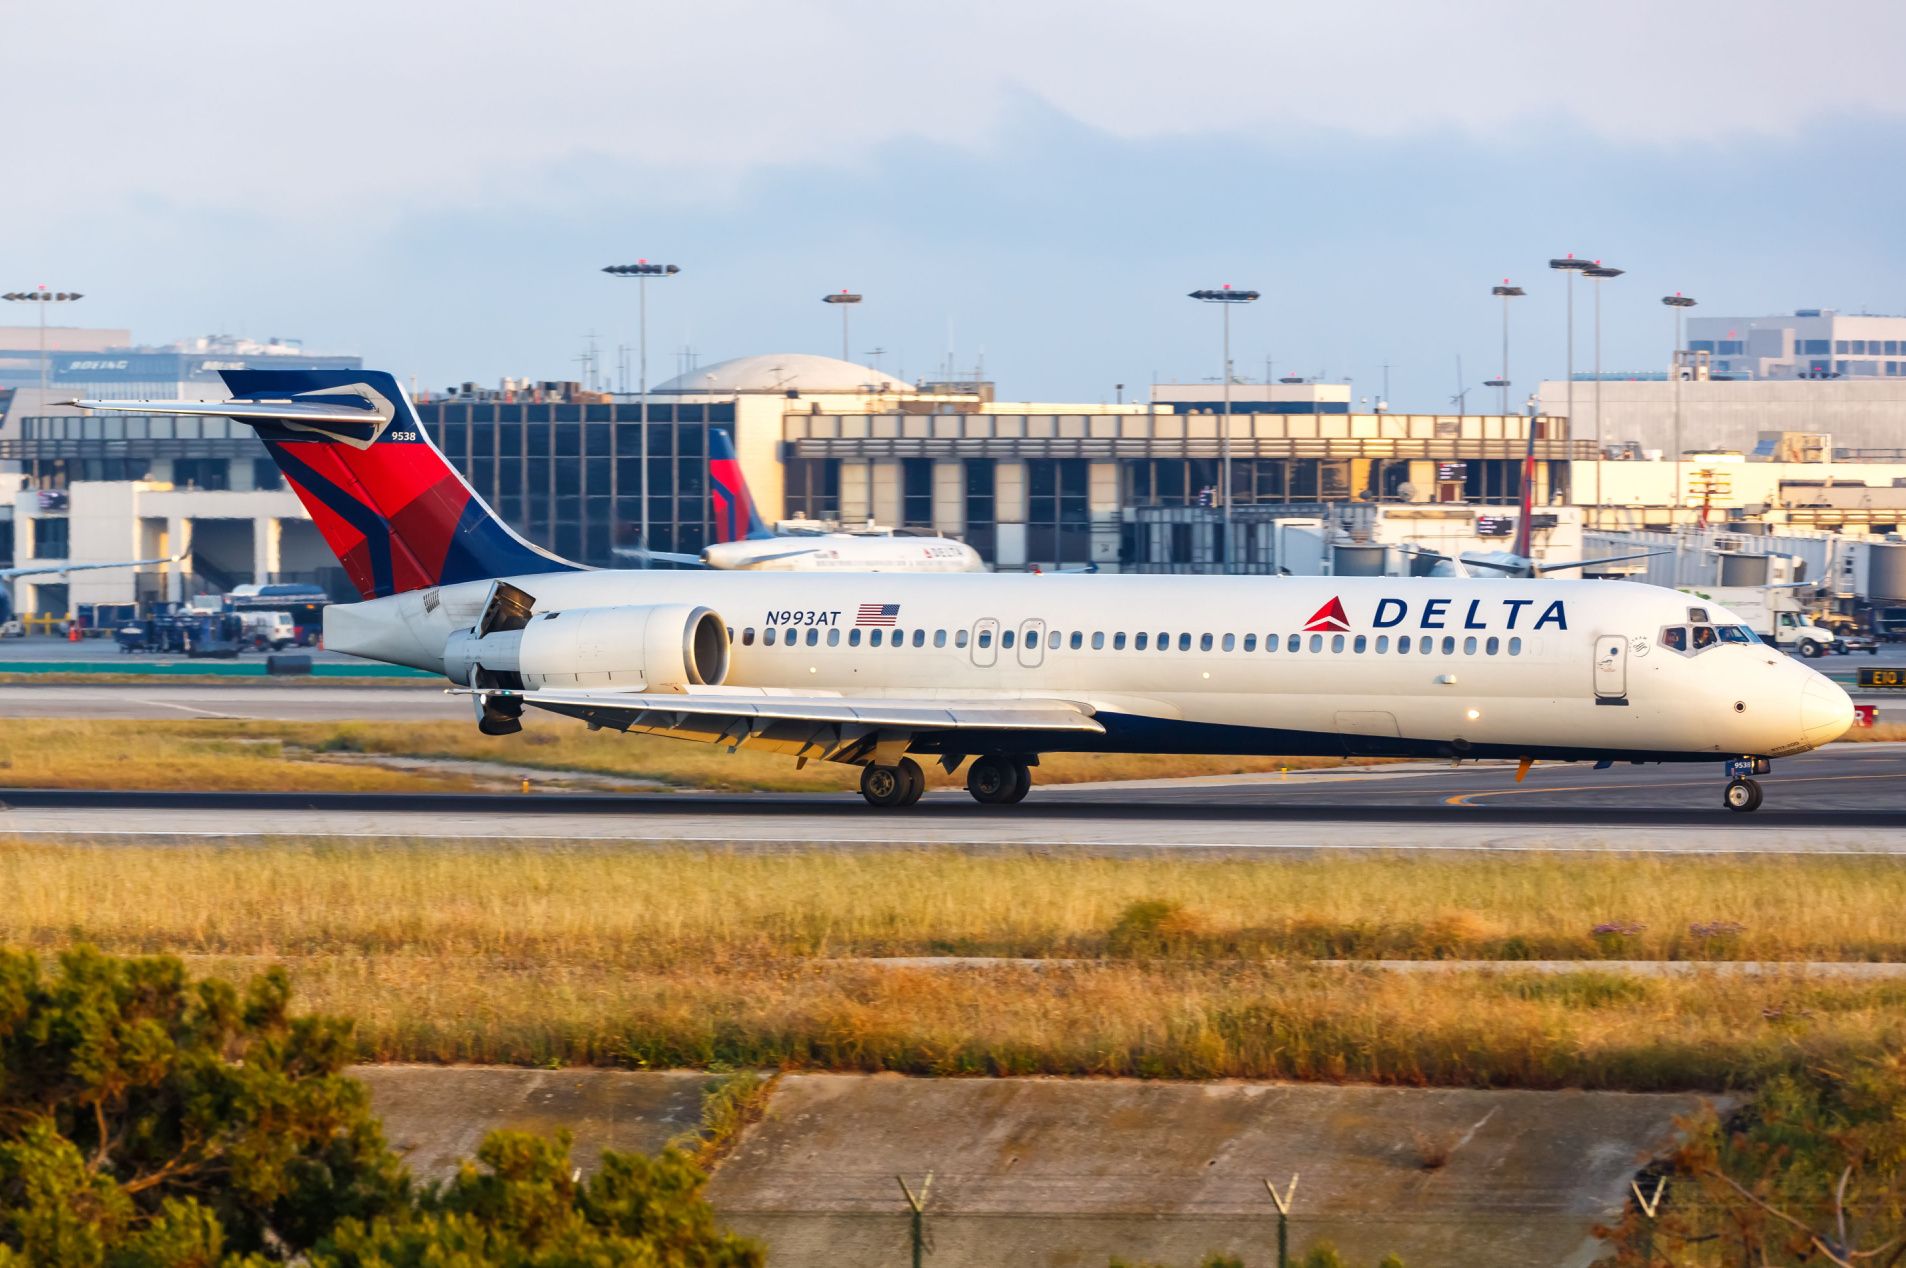 A Delta Air Lines Boeing 717 on a taxiway.